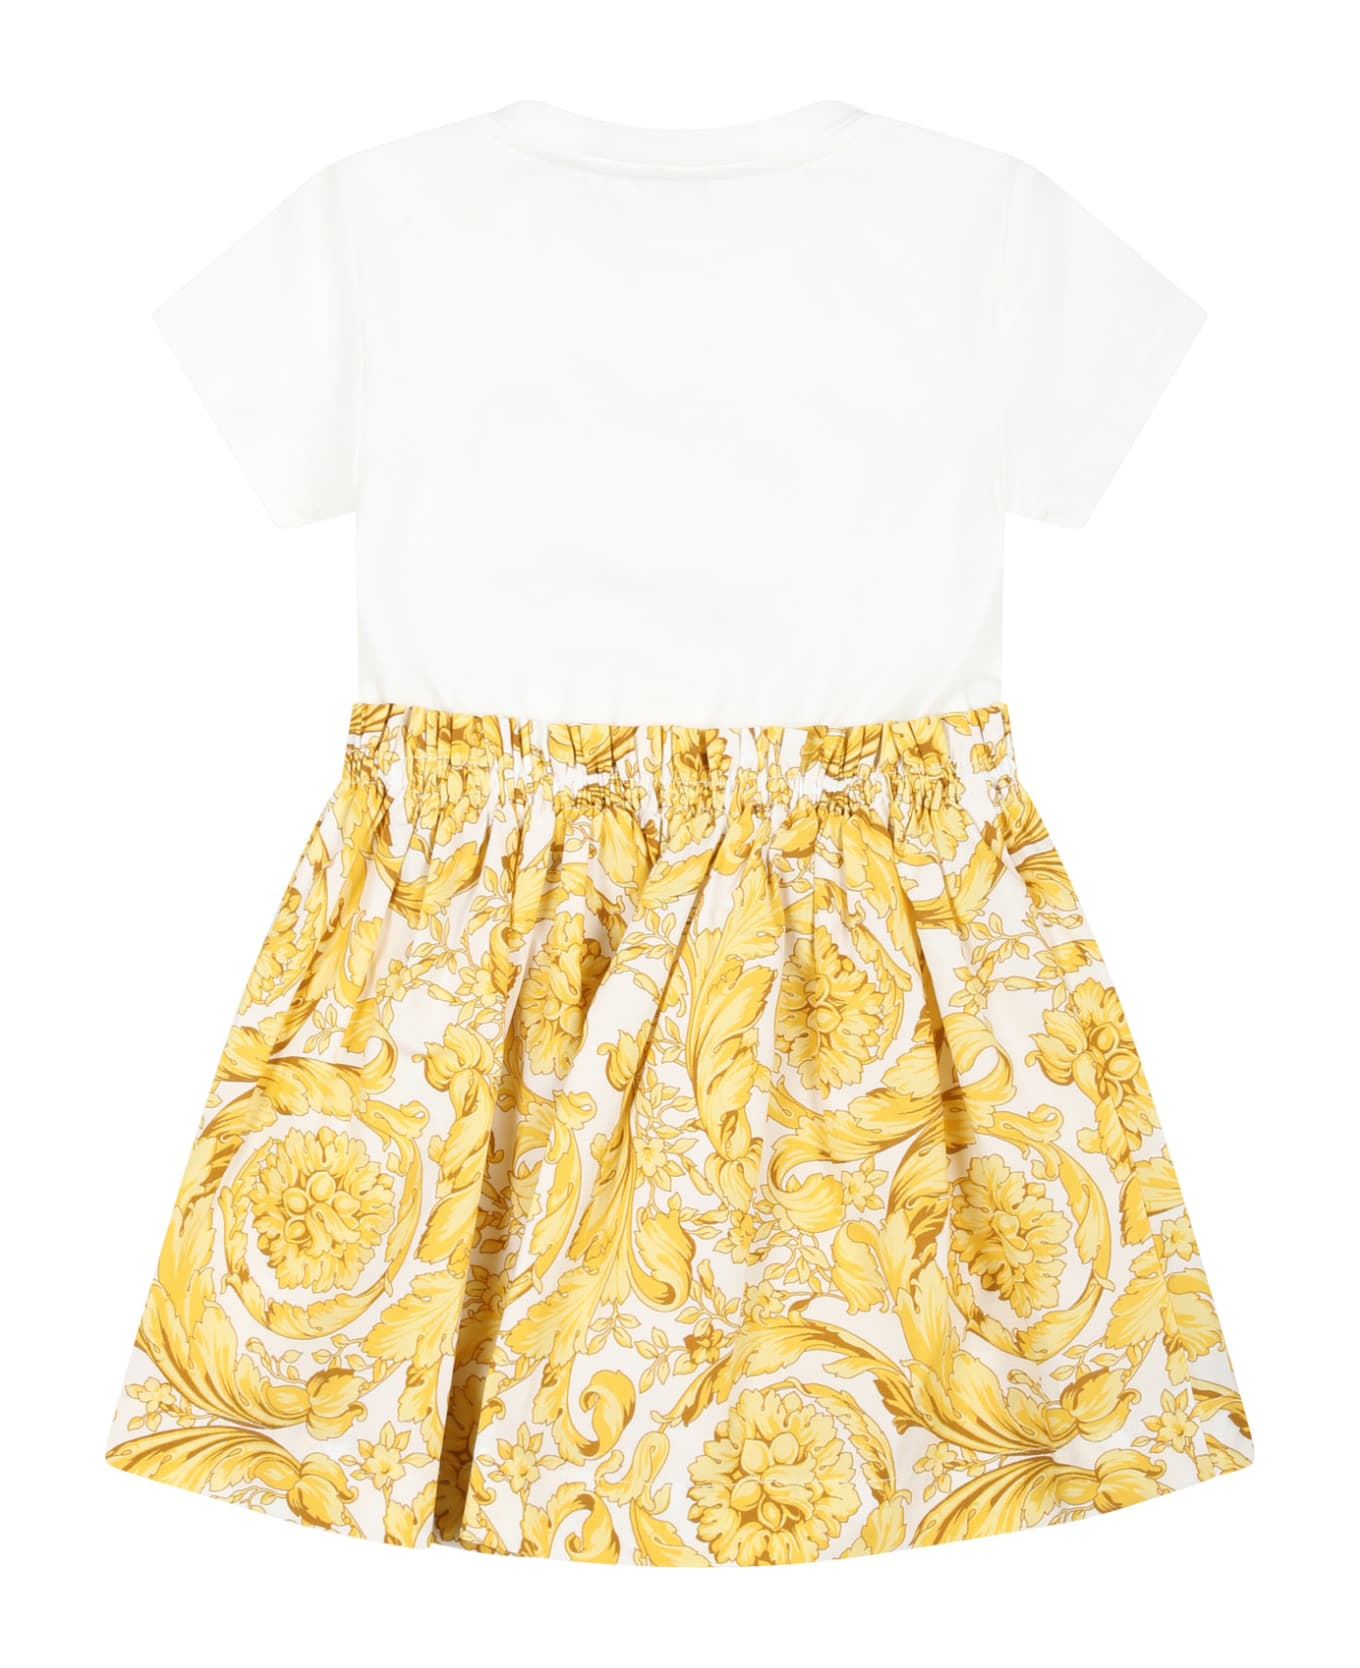 Versace White Dress For Baby Girl With Versace Logo And Baroque Print - White